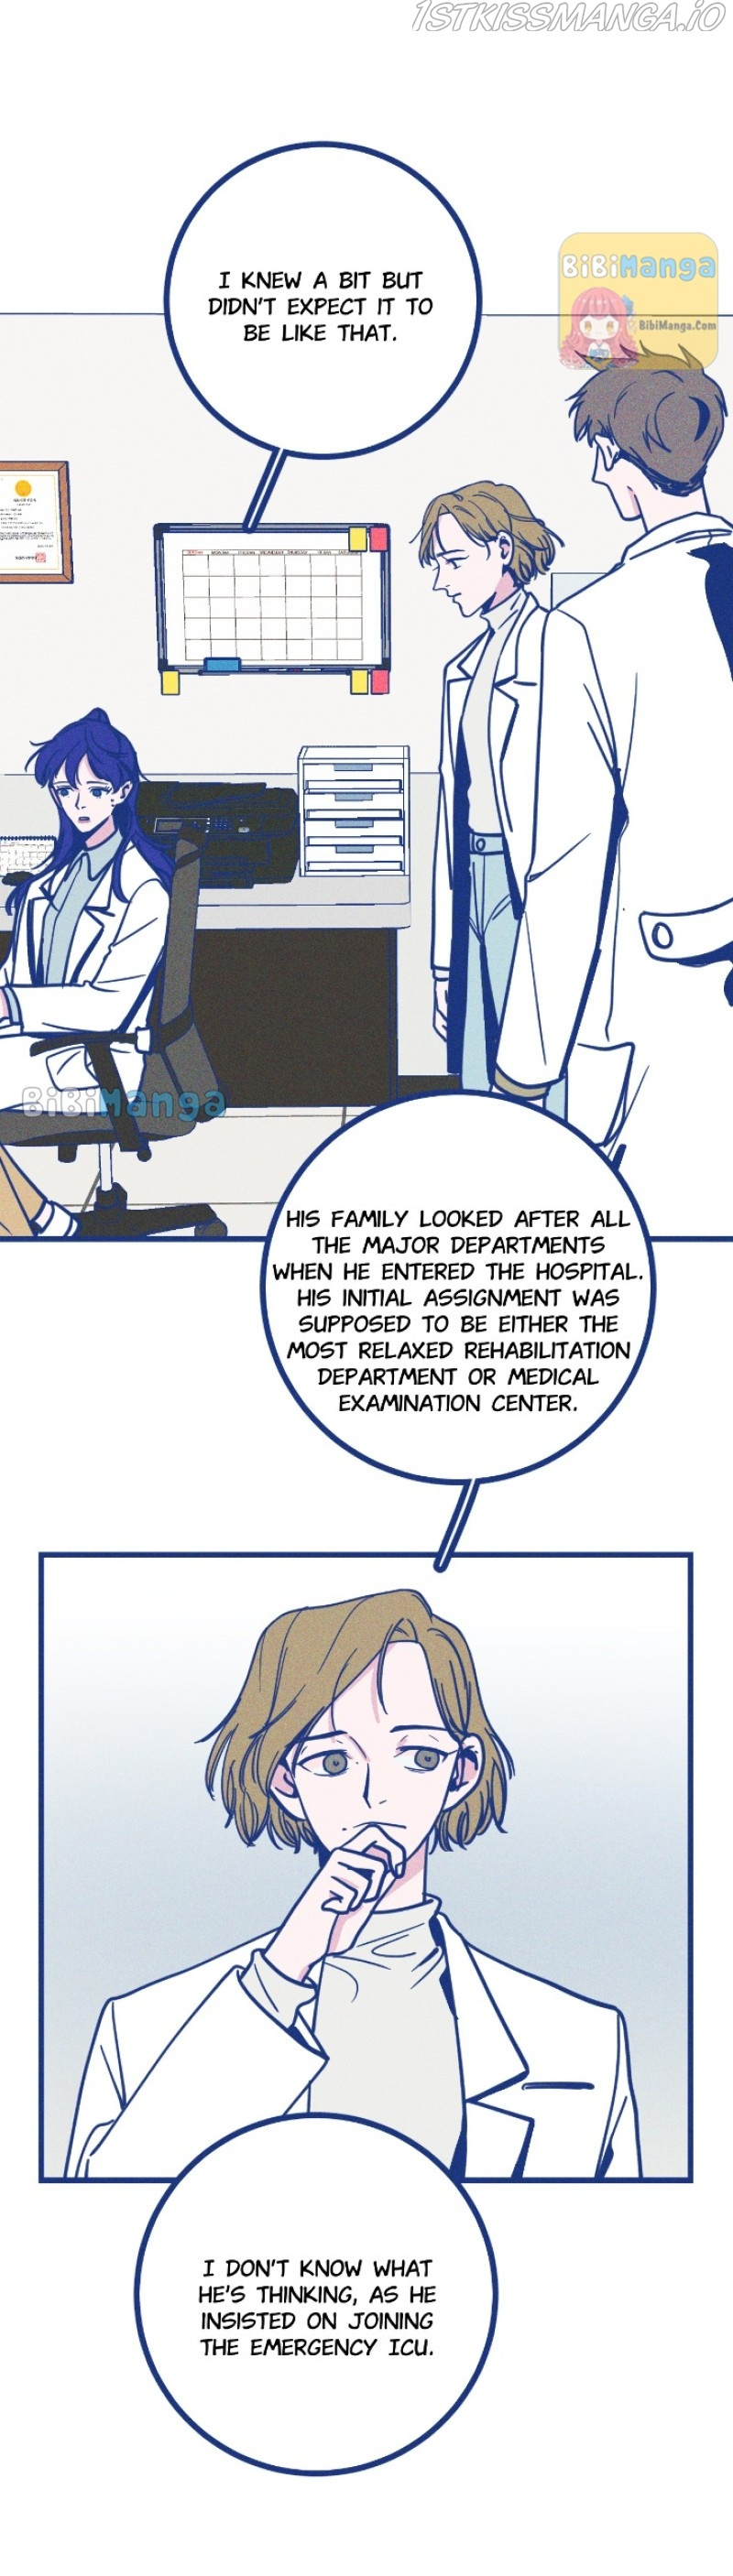 Thank You, Doctor Chapter 32